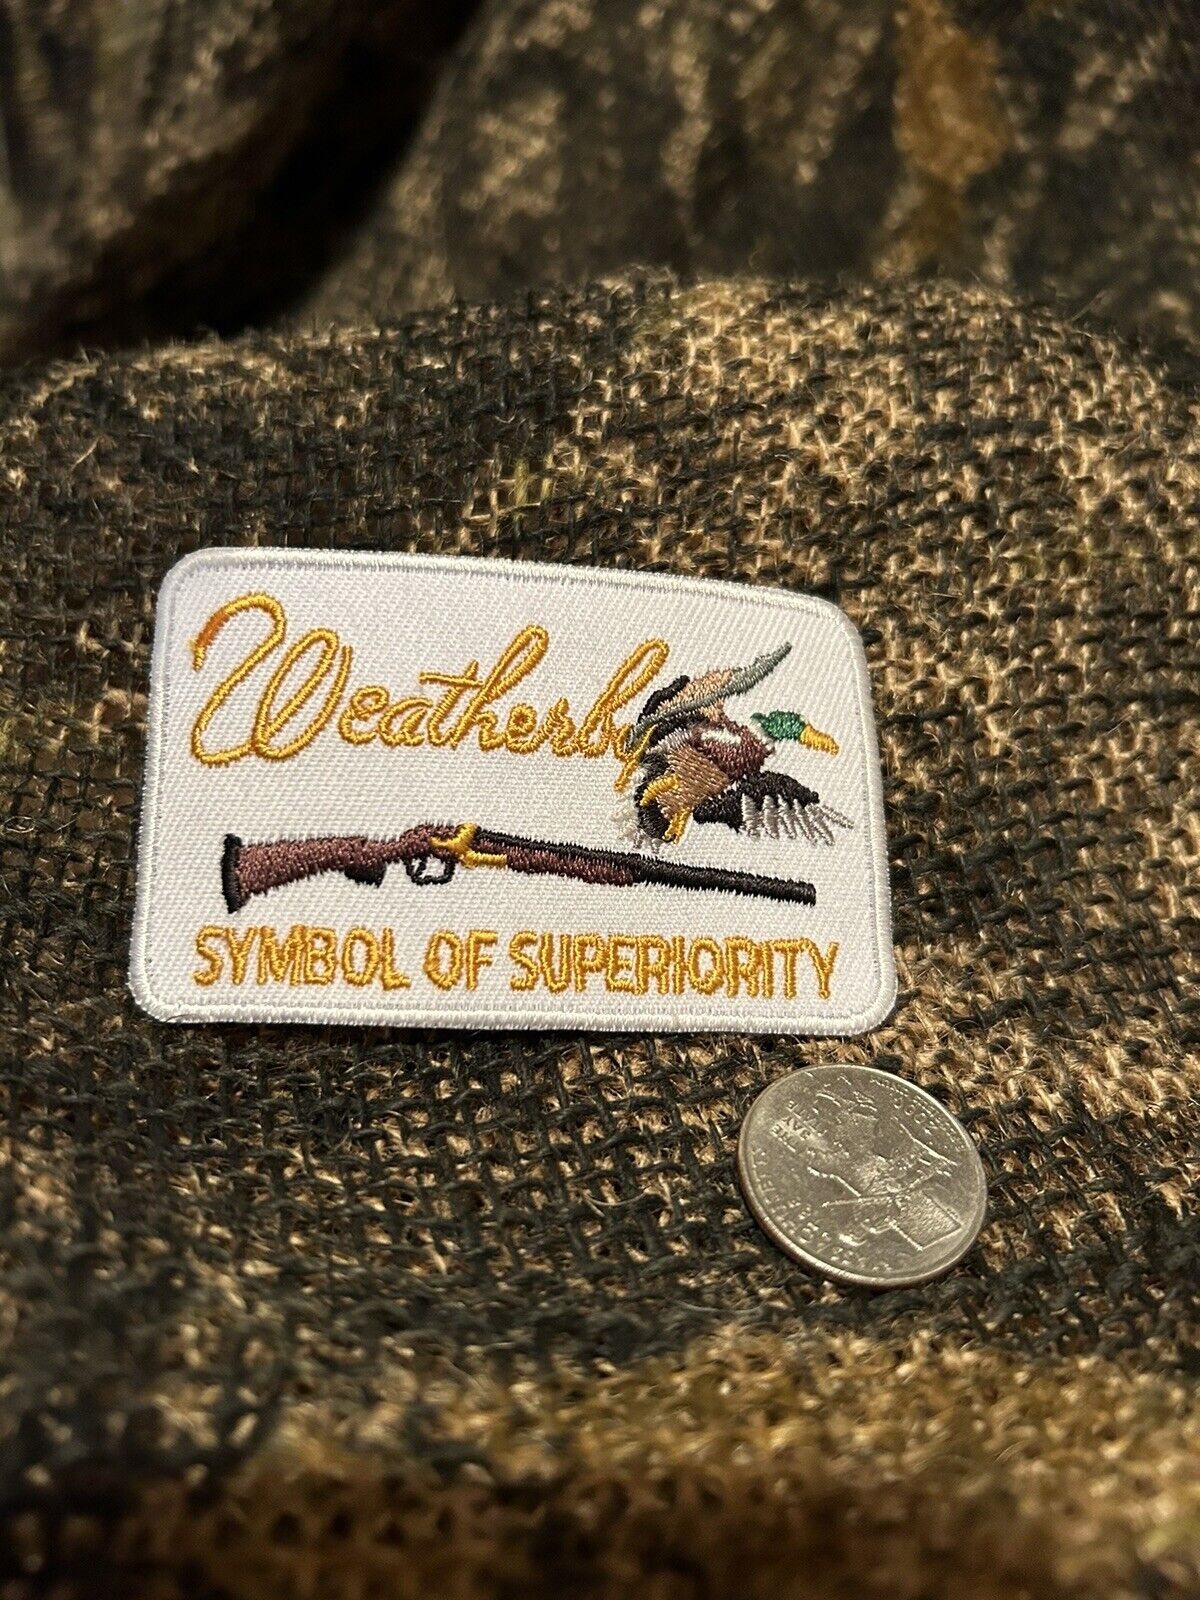 Weatherby Symbol of Superiority duck hunting Patch Vintage